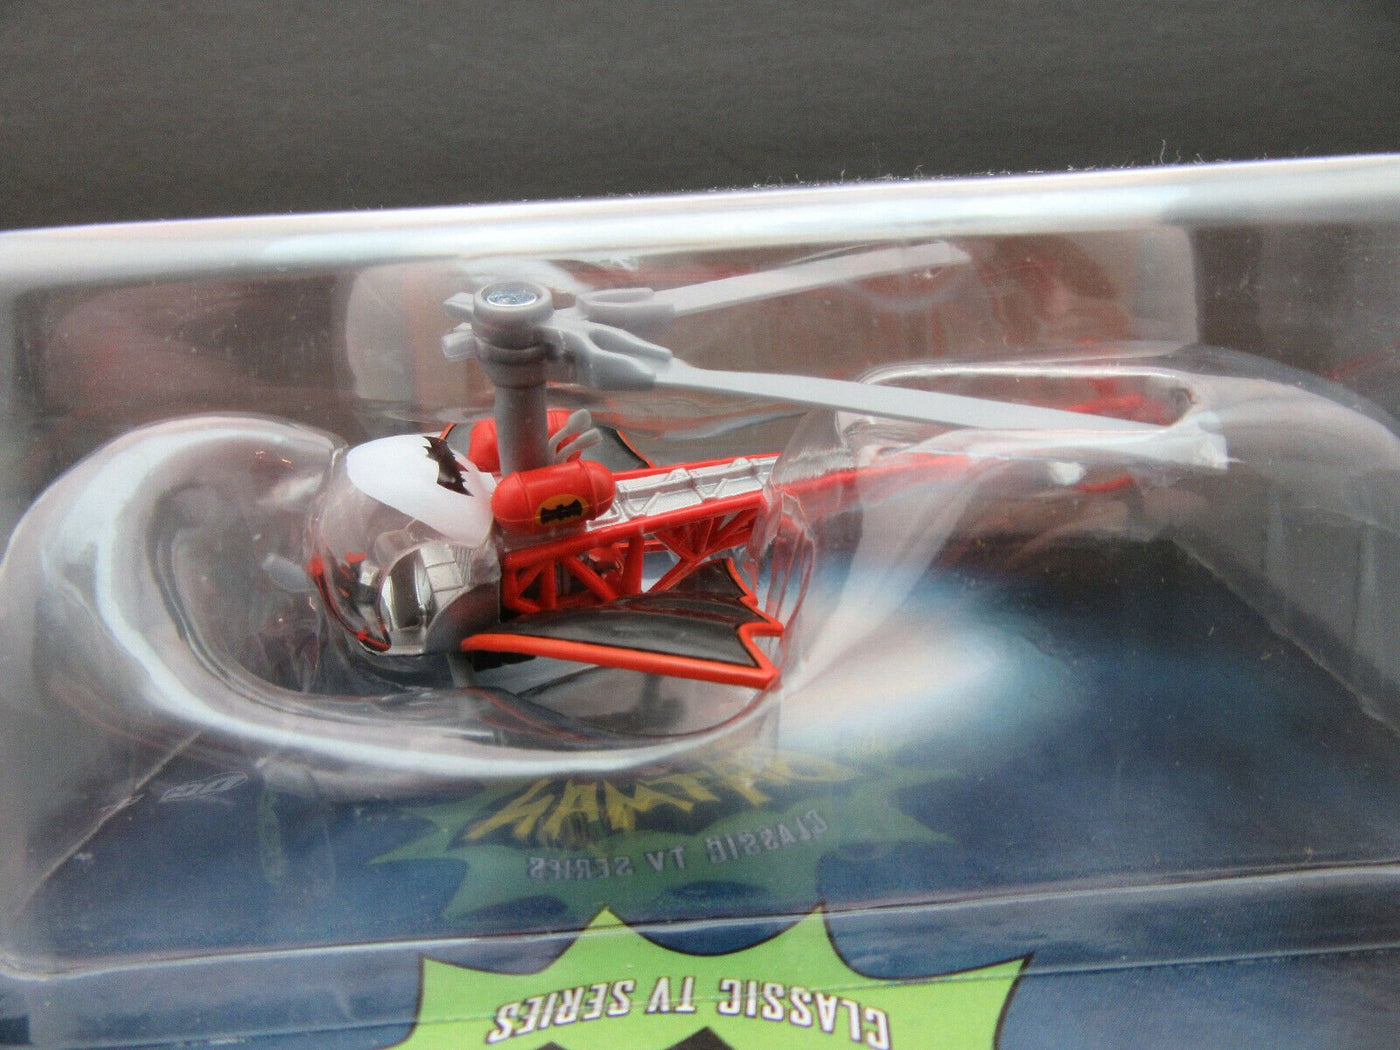 Batcopter ~ Batman Diecast Helicopter ~ Classic TV series ~ Hot Wheels